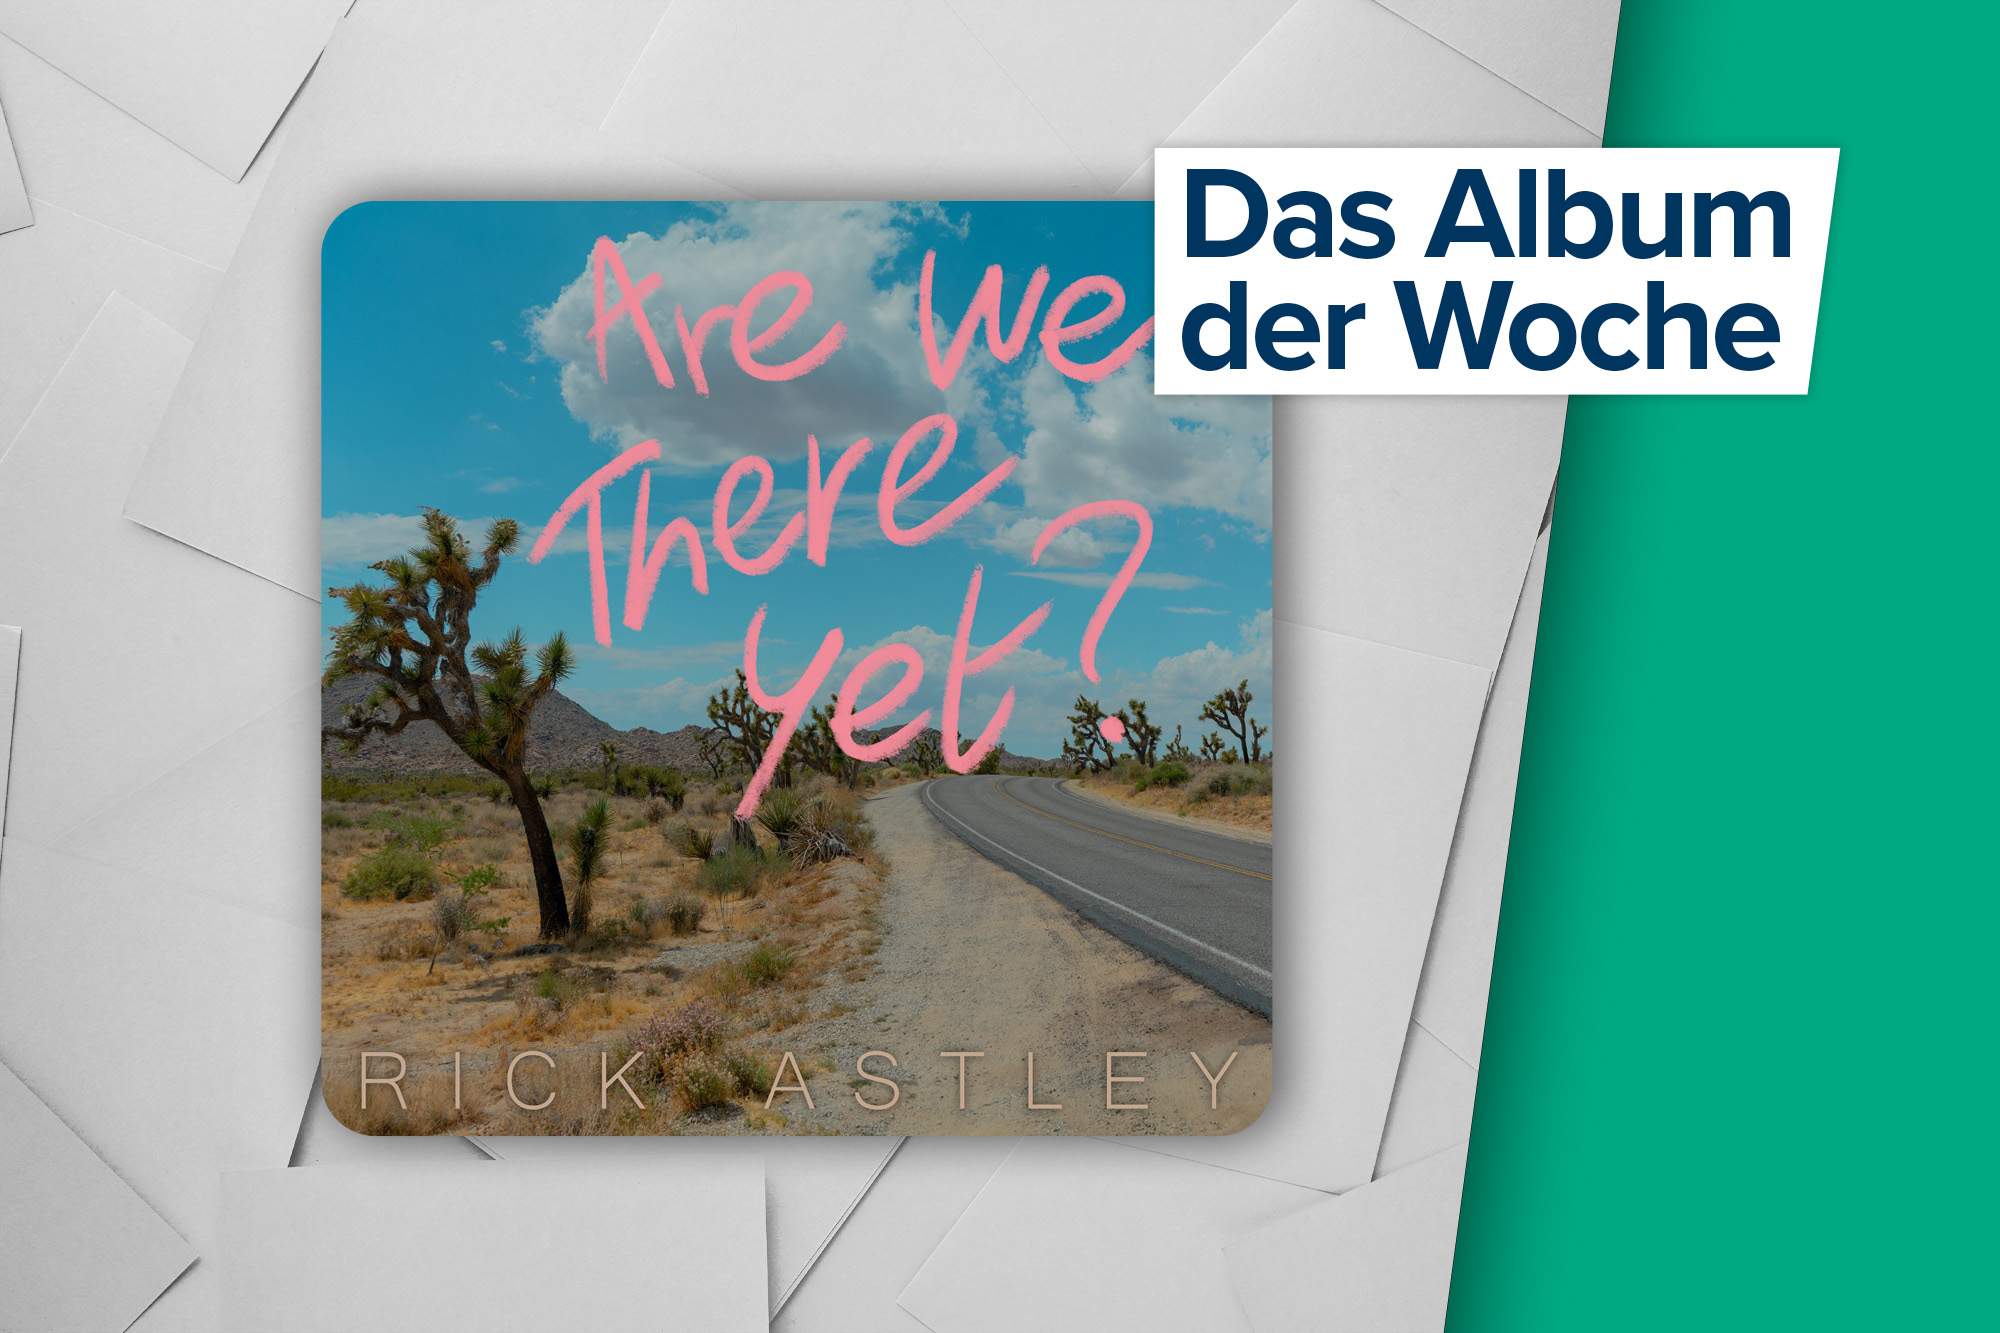 "Are We There Yet?" von Rick Astley (Label: BMG Rights Management)